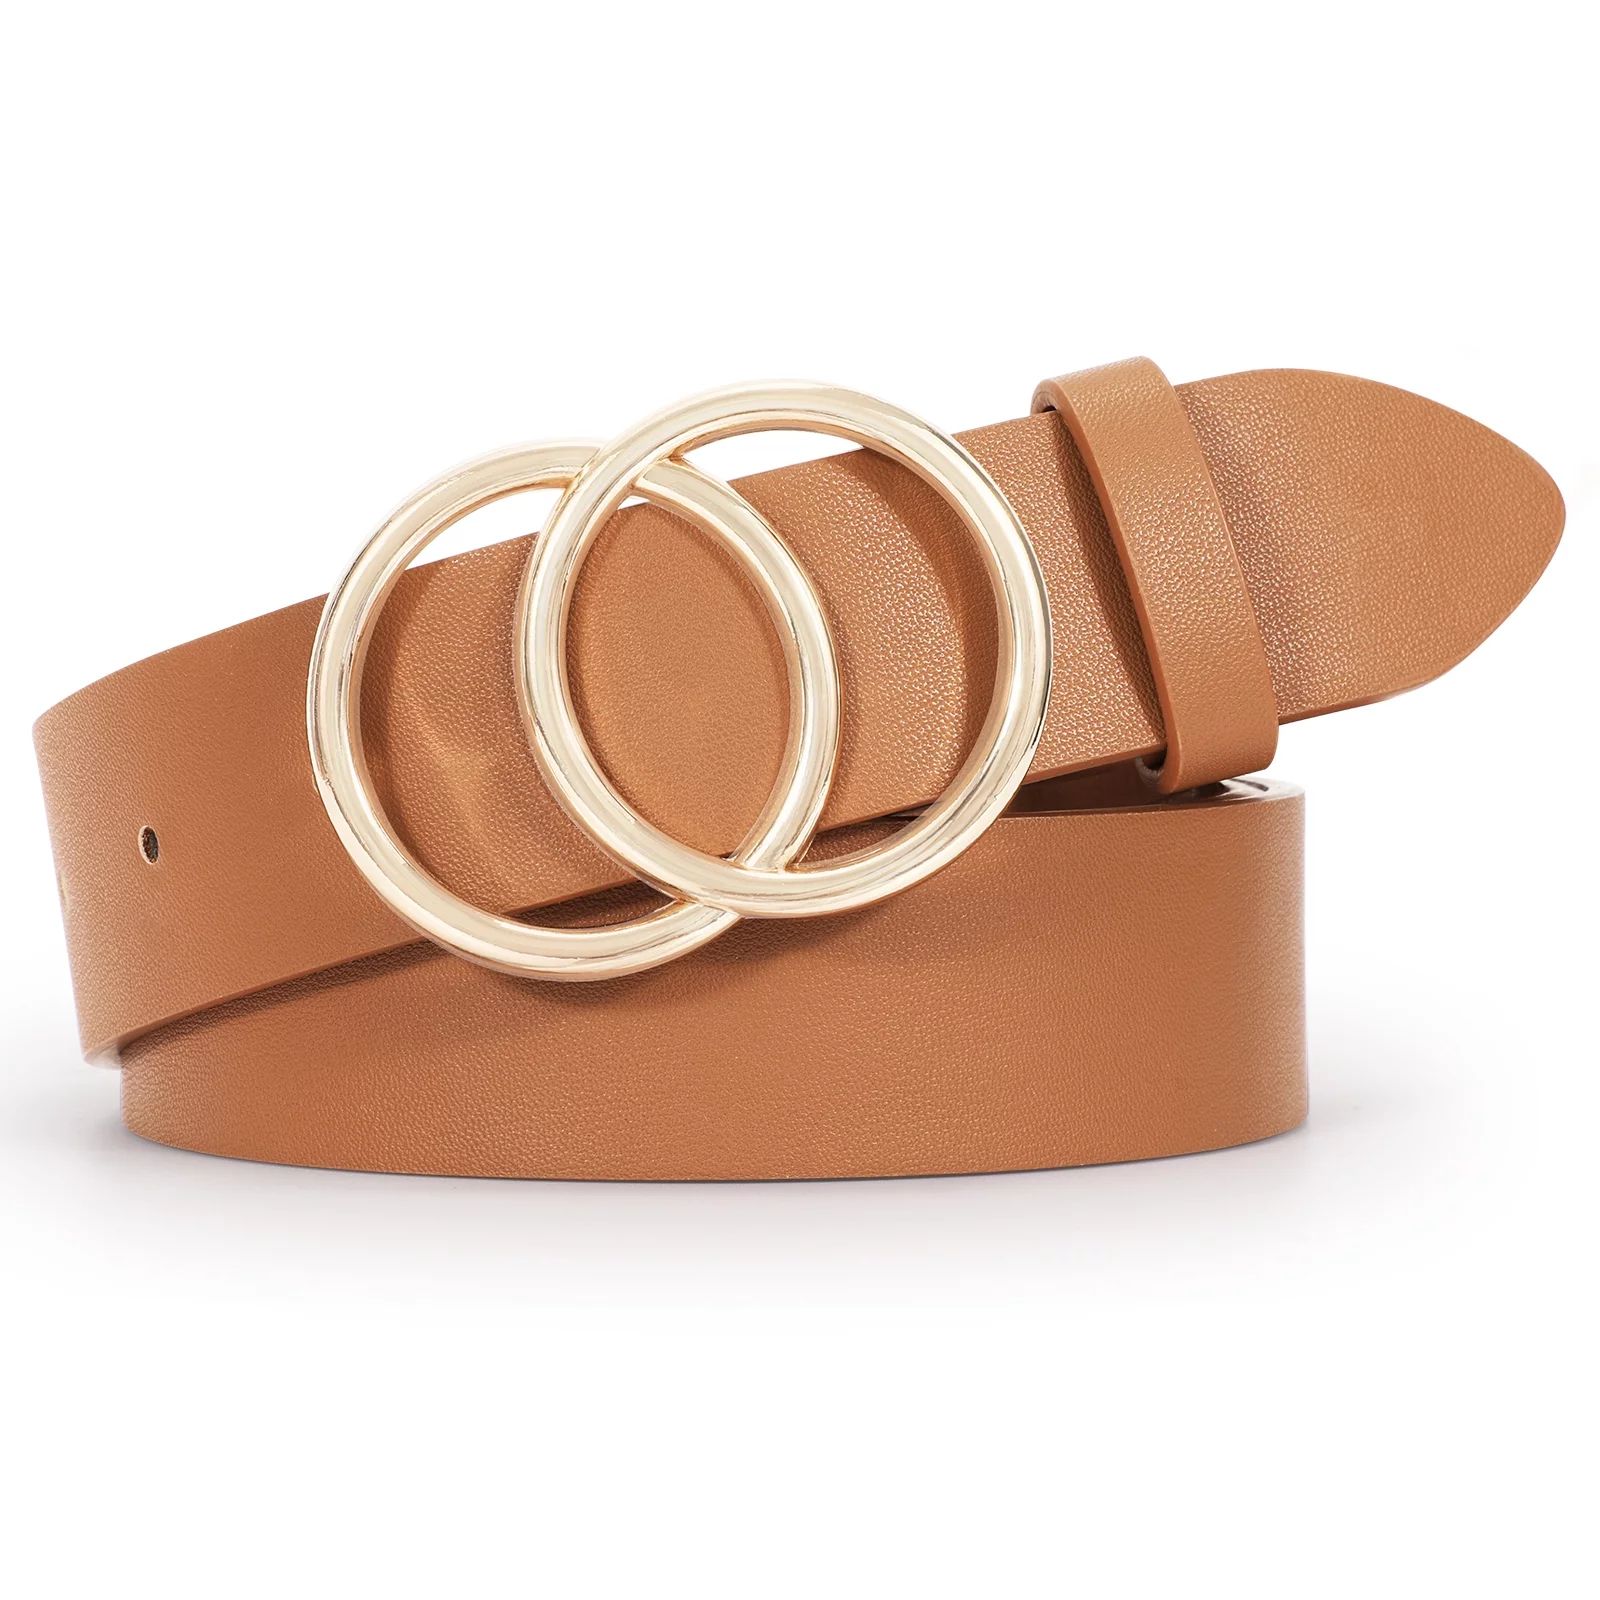 WHIPPY Women Leather Belt with Double Ring Buckle, Brown Waist Belt for Jeans Dress | Walmart (US)